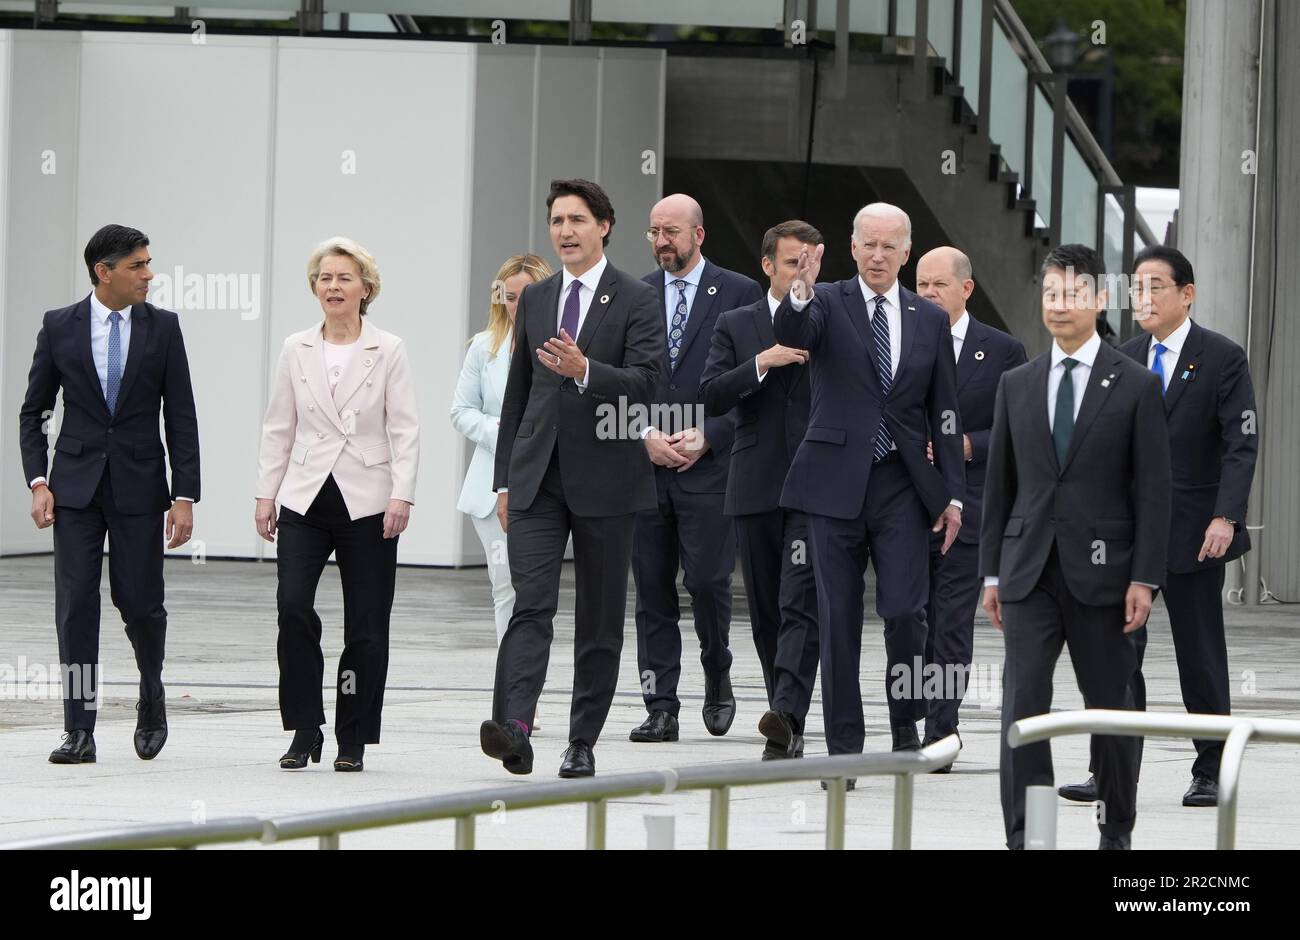 May 19, 2023, Hiroshima, Japan: (L-R) British Prime Minister Rishi Sunak, European Commission President Ursula von der Leyen, Italian Prime Minister Giorgia Meloni, Canadian Prime Minister Justin Trudeau, European Council President Charles Michel, French President Emmanuel Macron, US President Joe Biden, German Chancellor Olaf Scholz, an unidentified official and Japan's Prime Minister Fumio Kishida walk out of the Peace Memorial Museum to a flower wreath laying ceremony in the Peace Memorial Park as part of the G7 Hiroshima Summit in Hiroshima, Japan, 19 May 2023. (Photo by Franck Robichon / Stock Photo